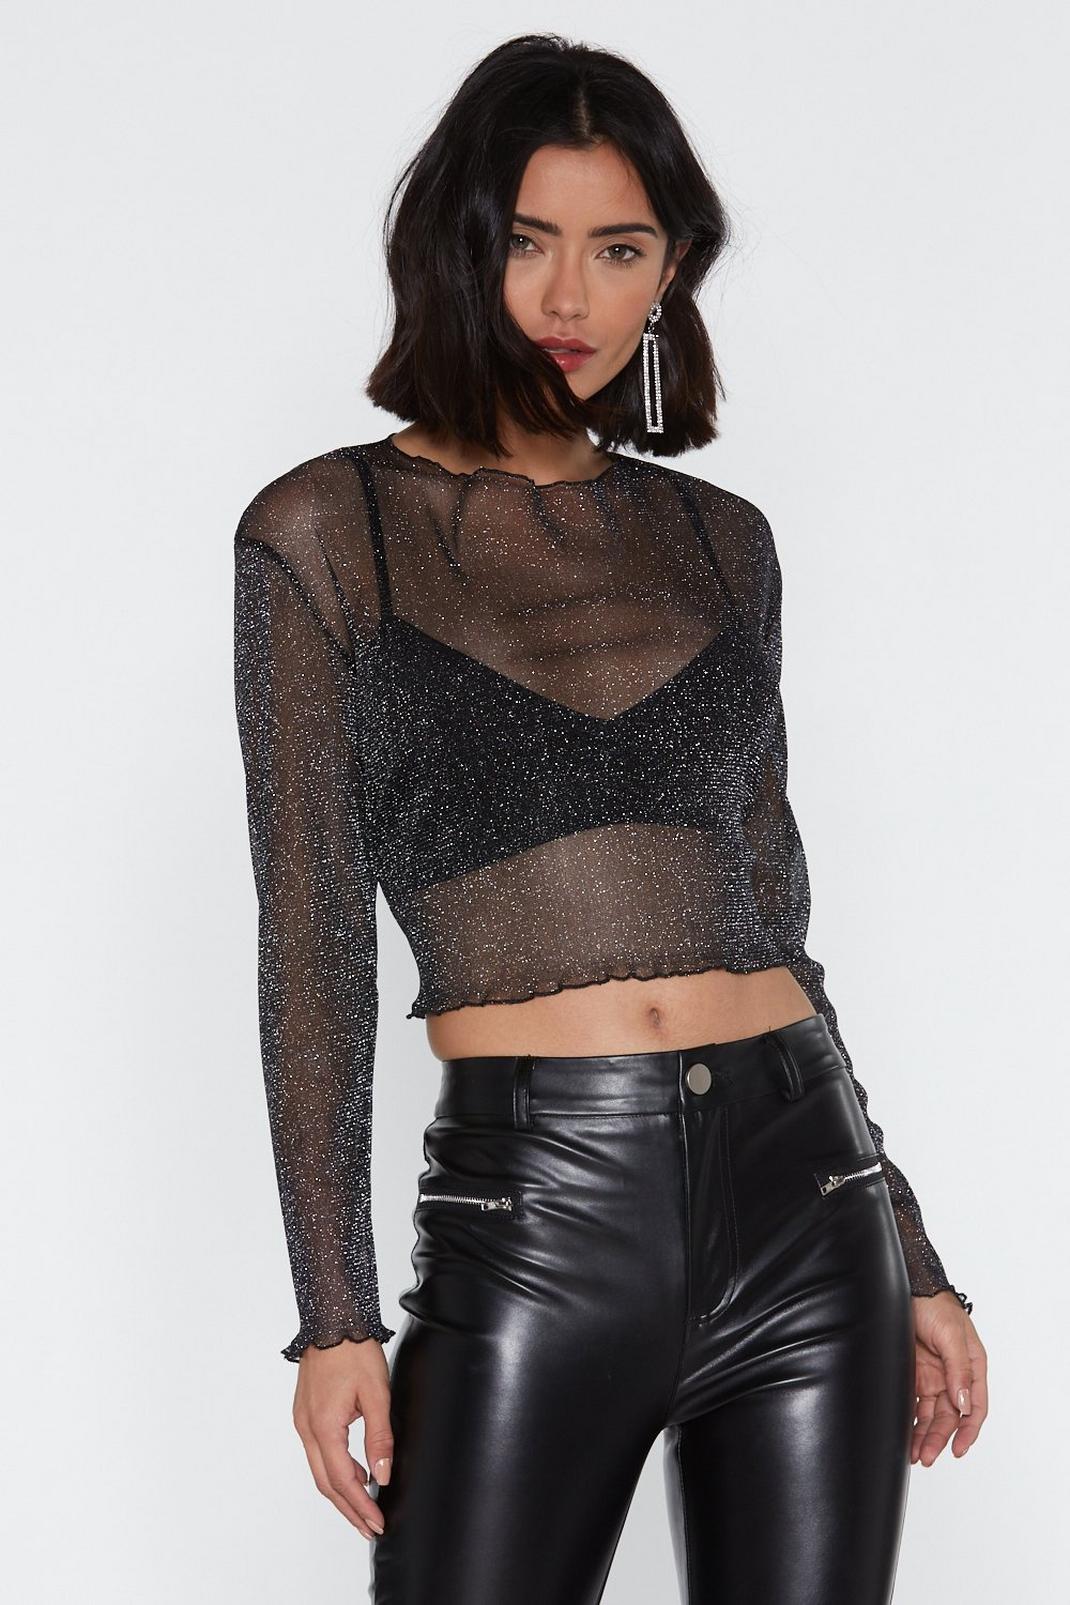 One Hell of a Mesh Glitter Top